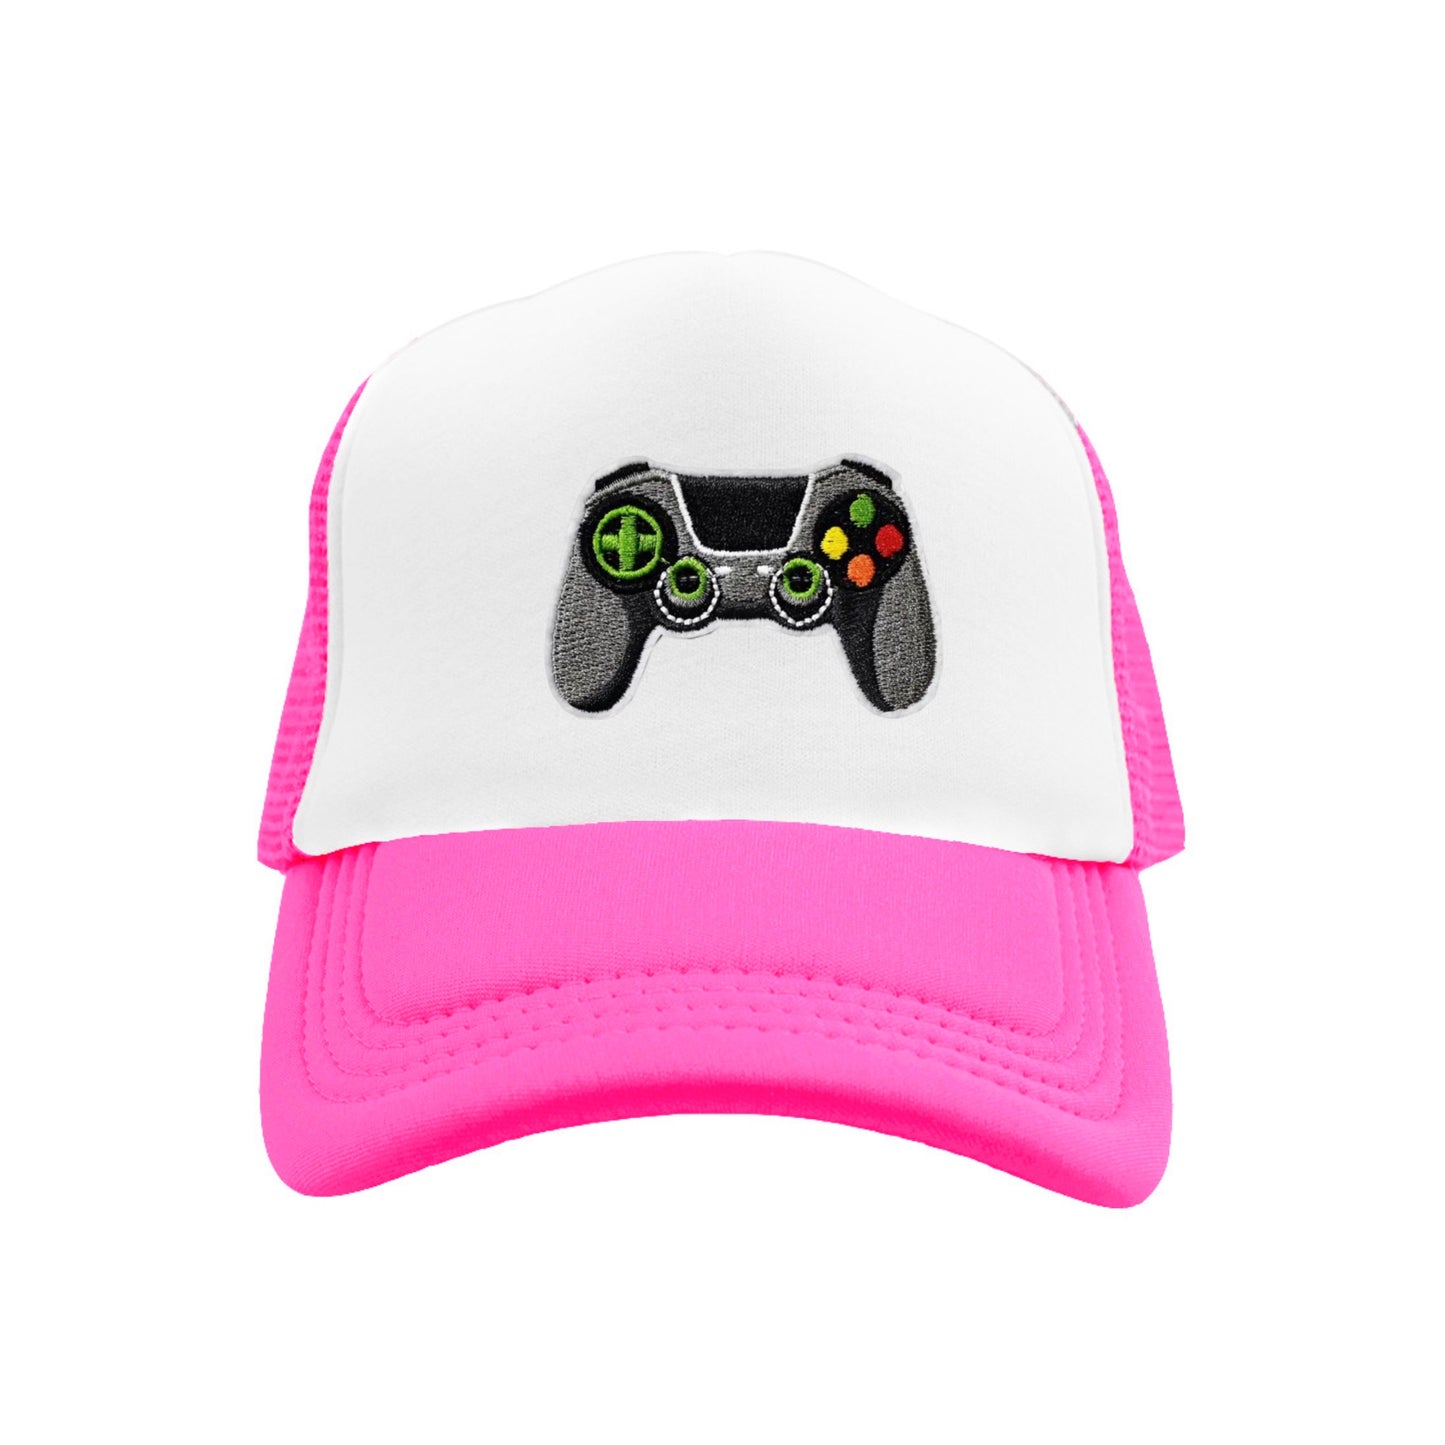 Ready, Player 1 Snapback Hat - Hot Pink / White